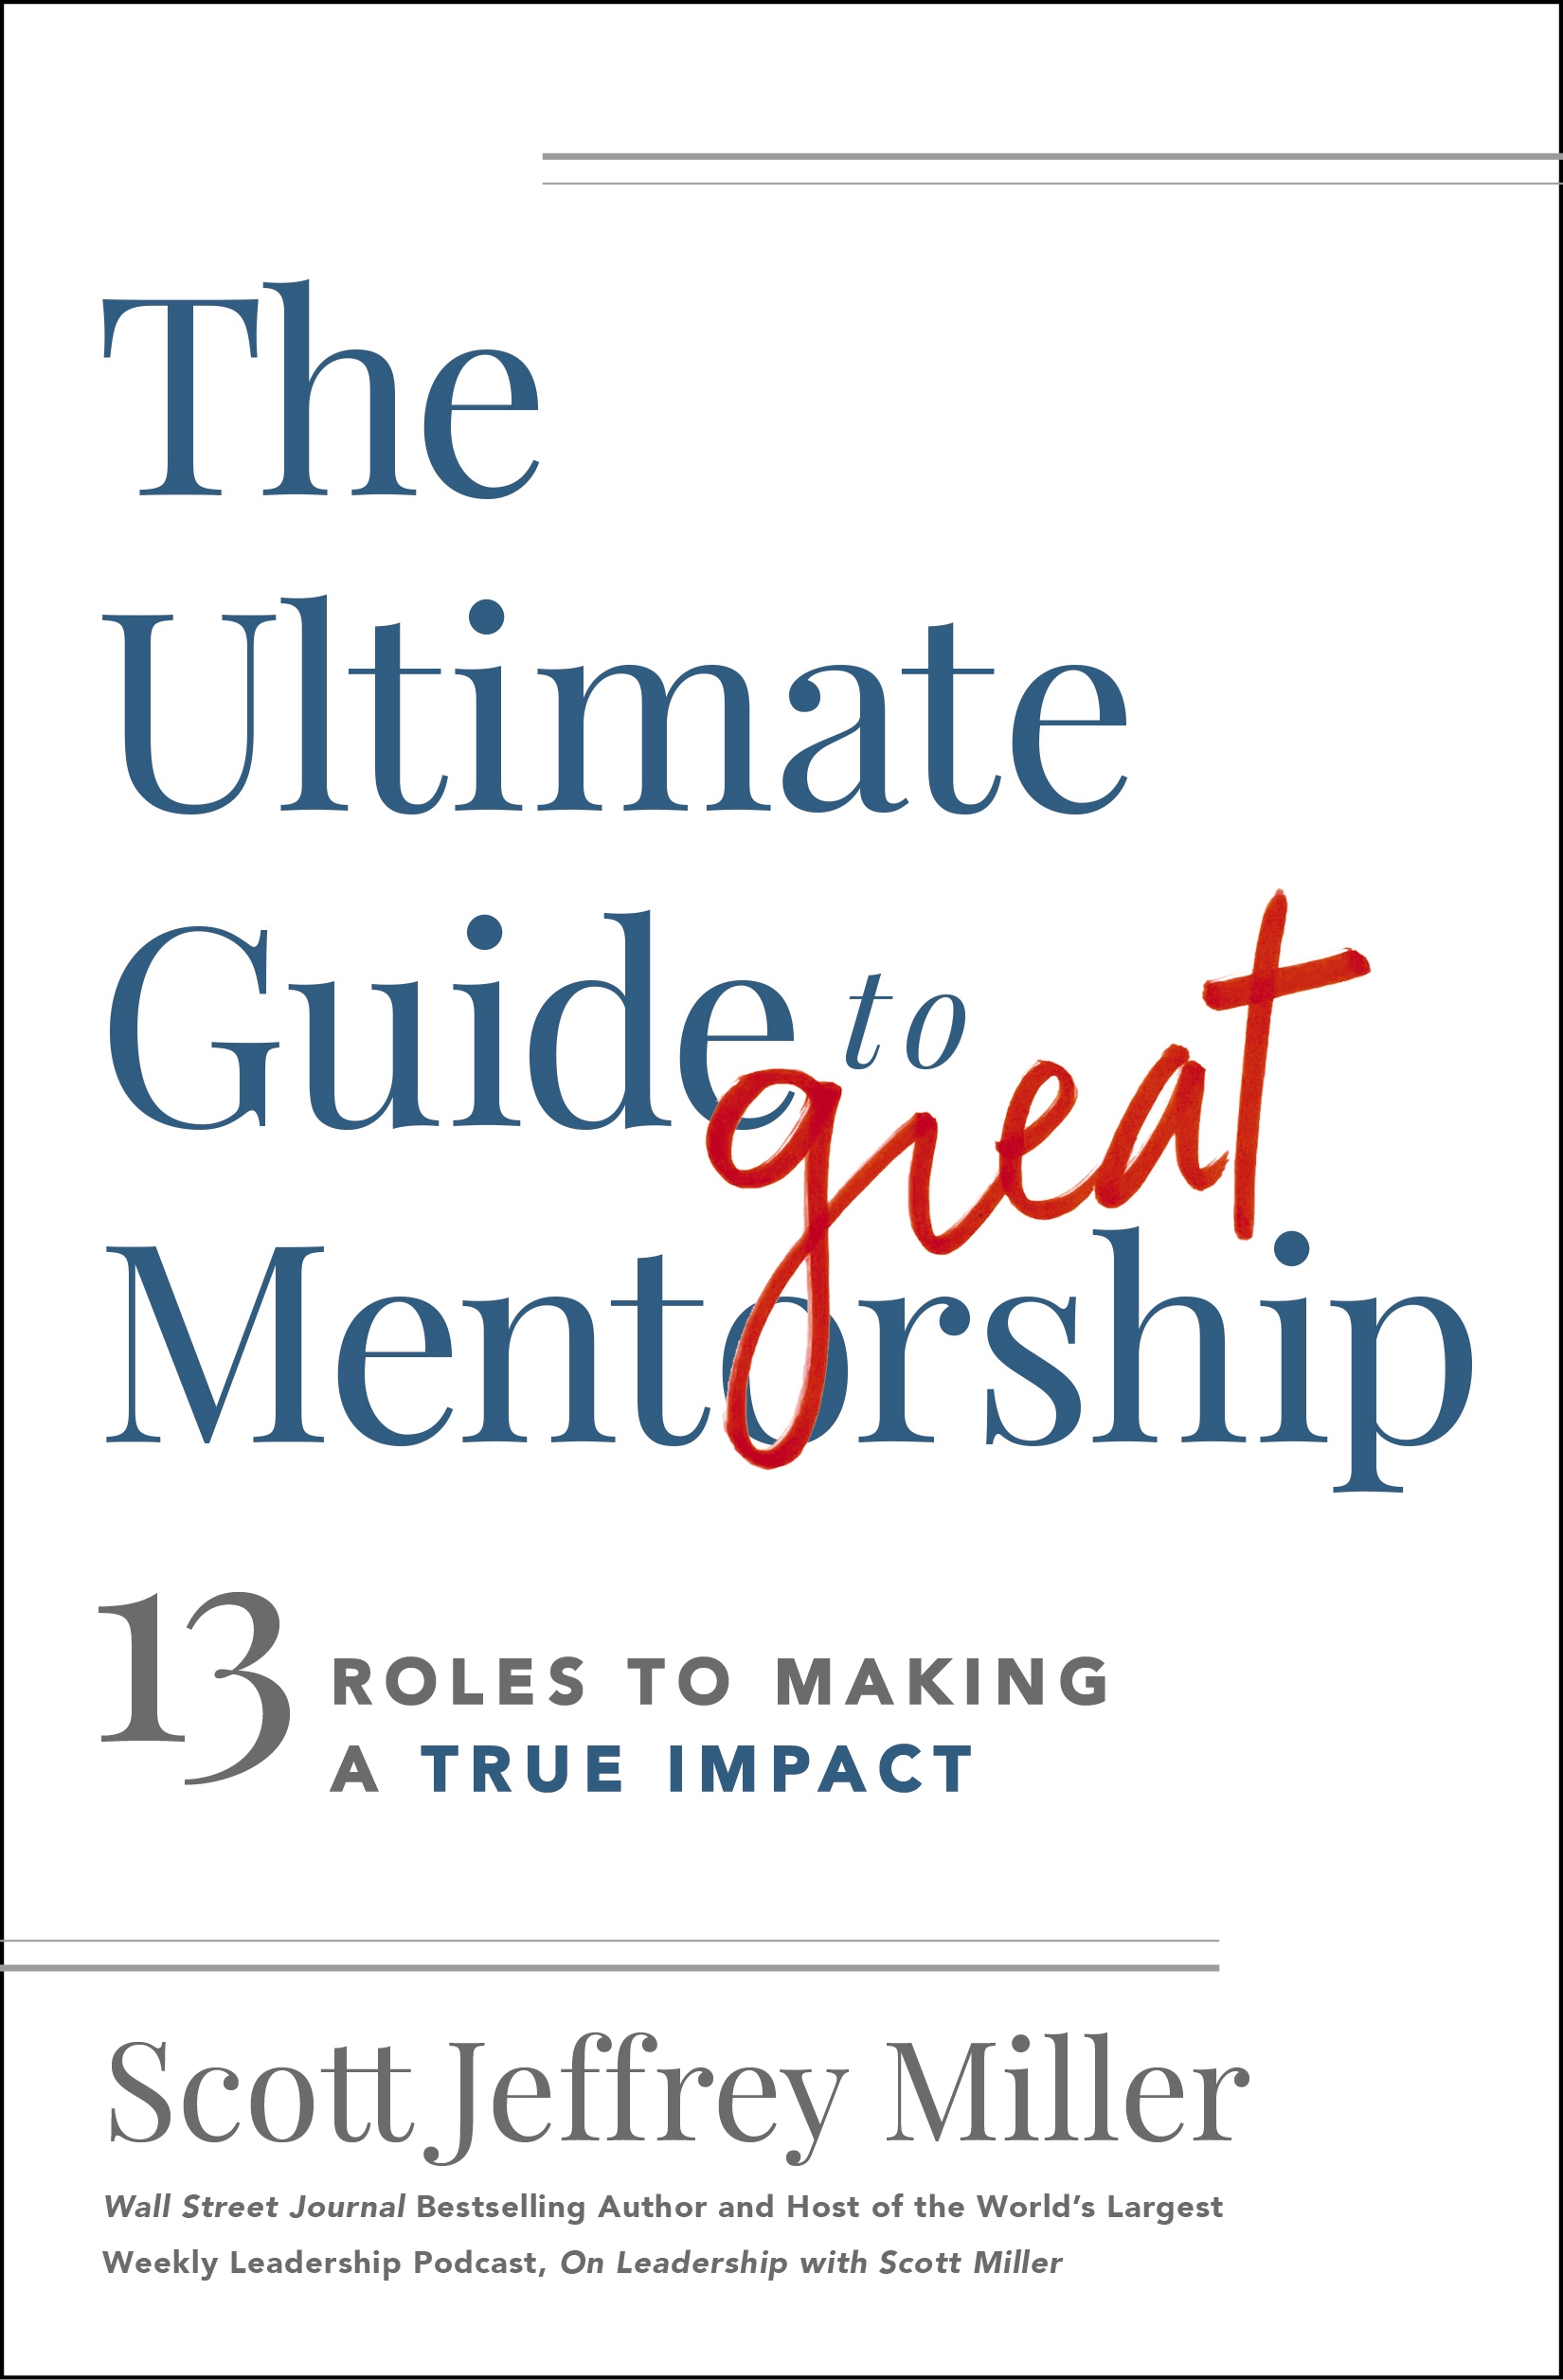 The Ultimate Guide to Great Mentorship